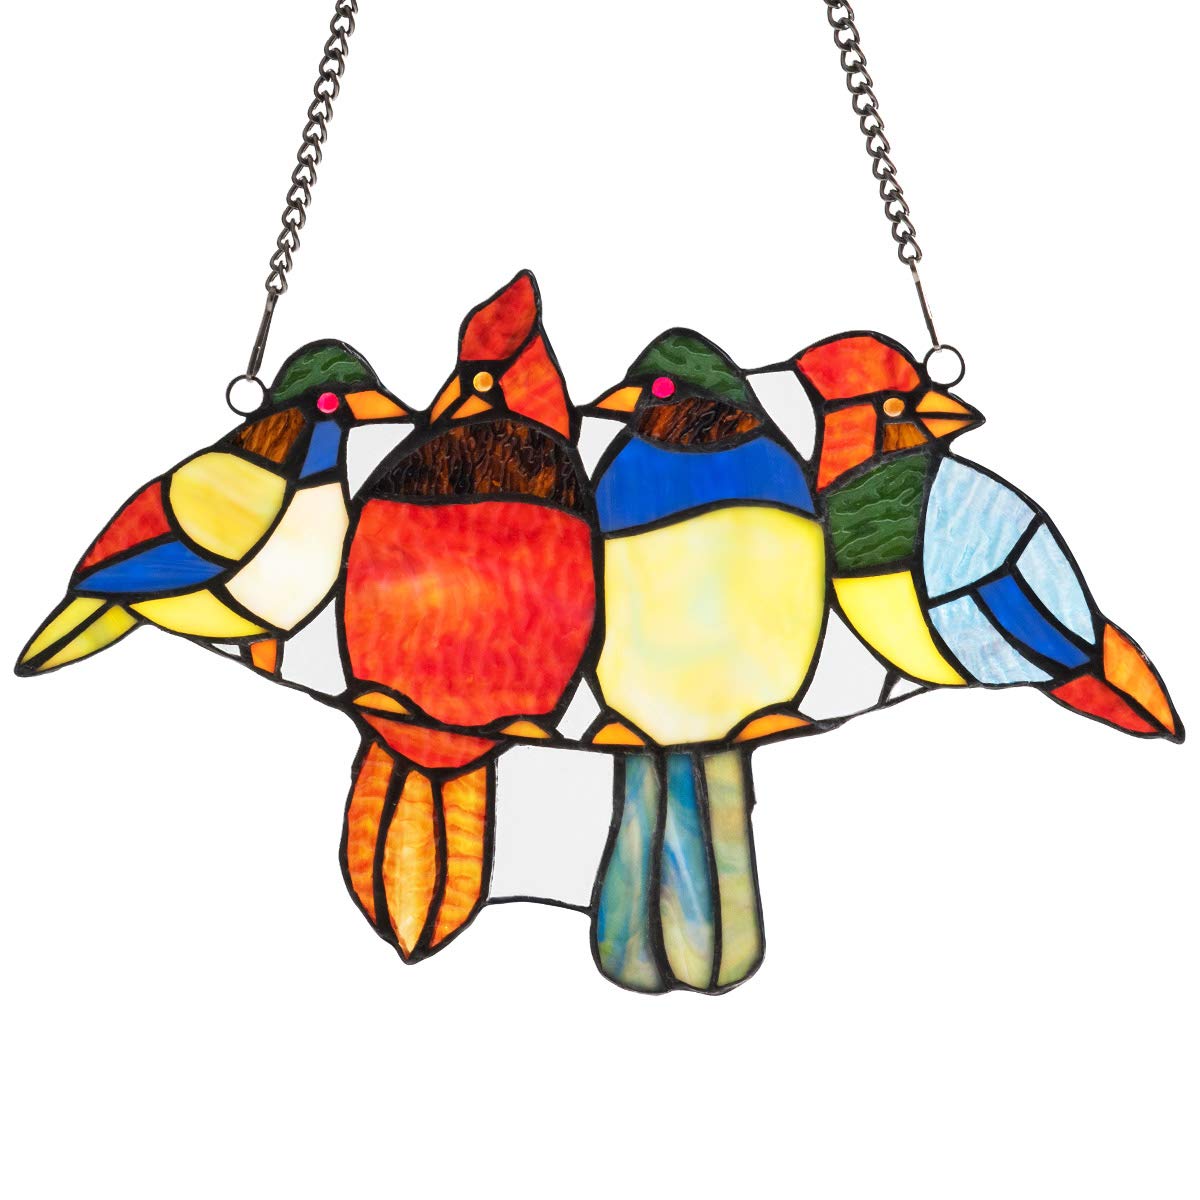 Tangkula Tiffany Glass Window Panel, 14.5 Inches Tiffany Style Stained Glass, 4 Birds Window Panel Hangings with Chain